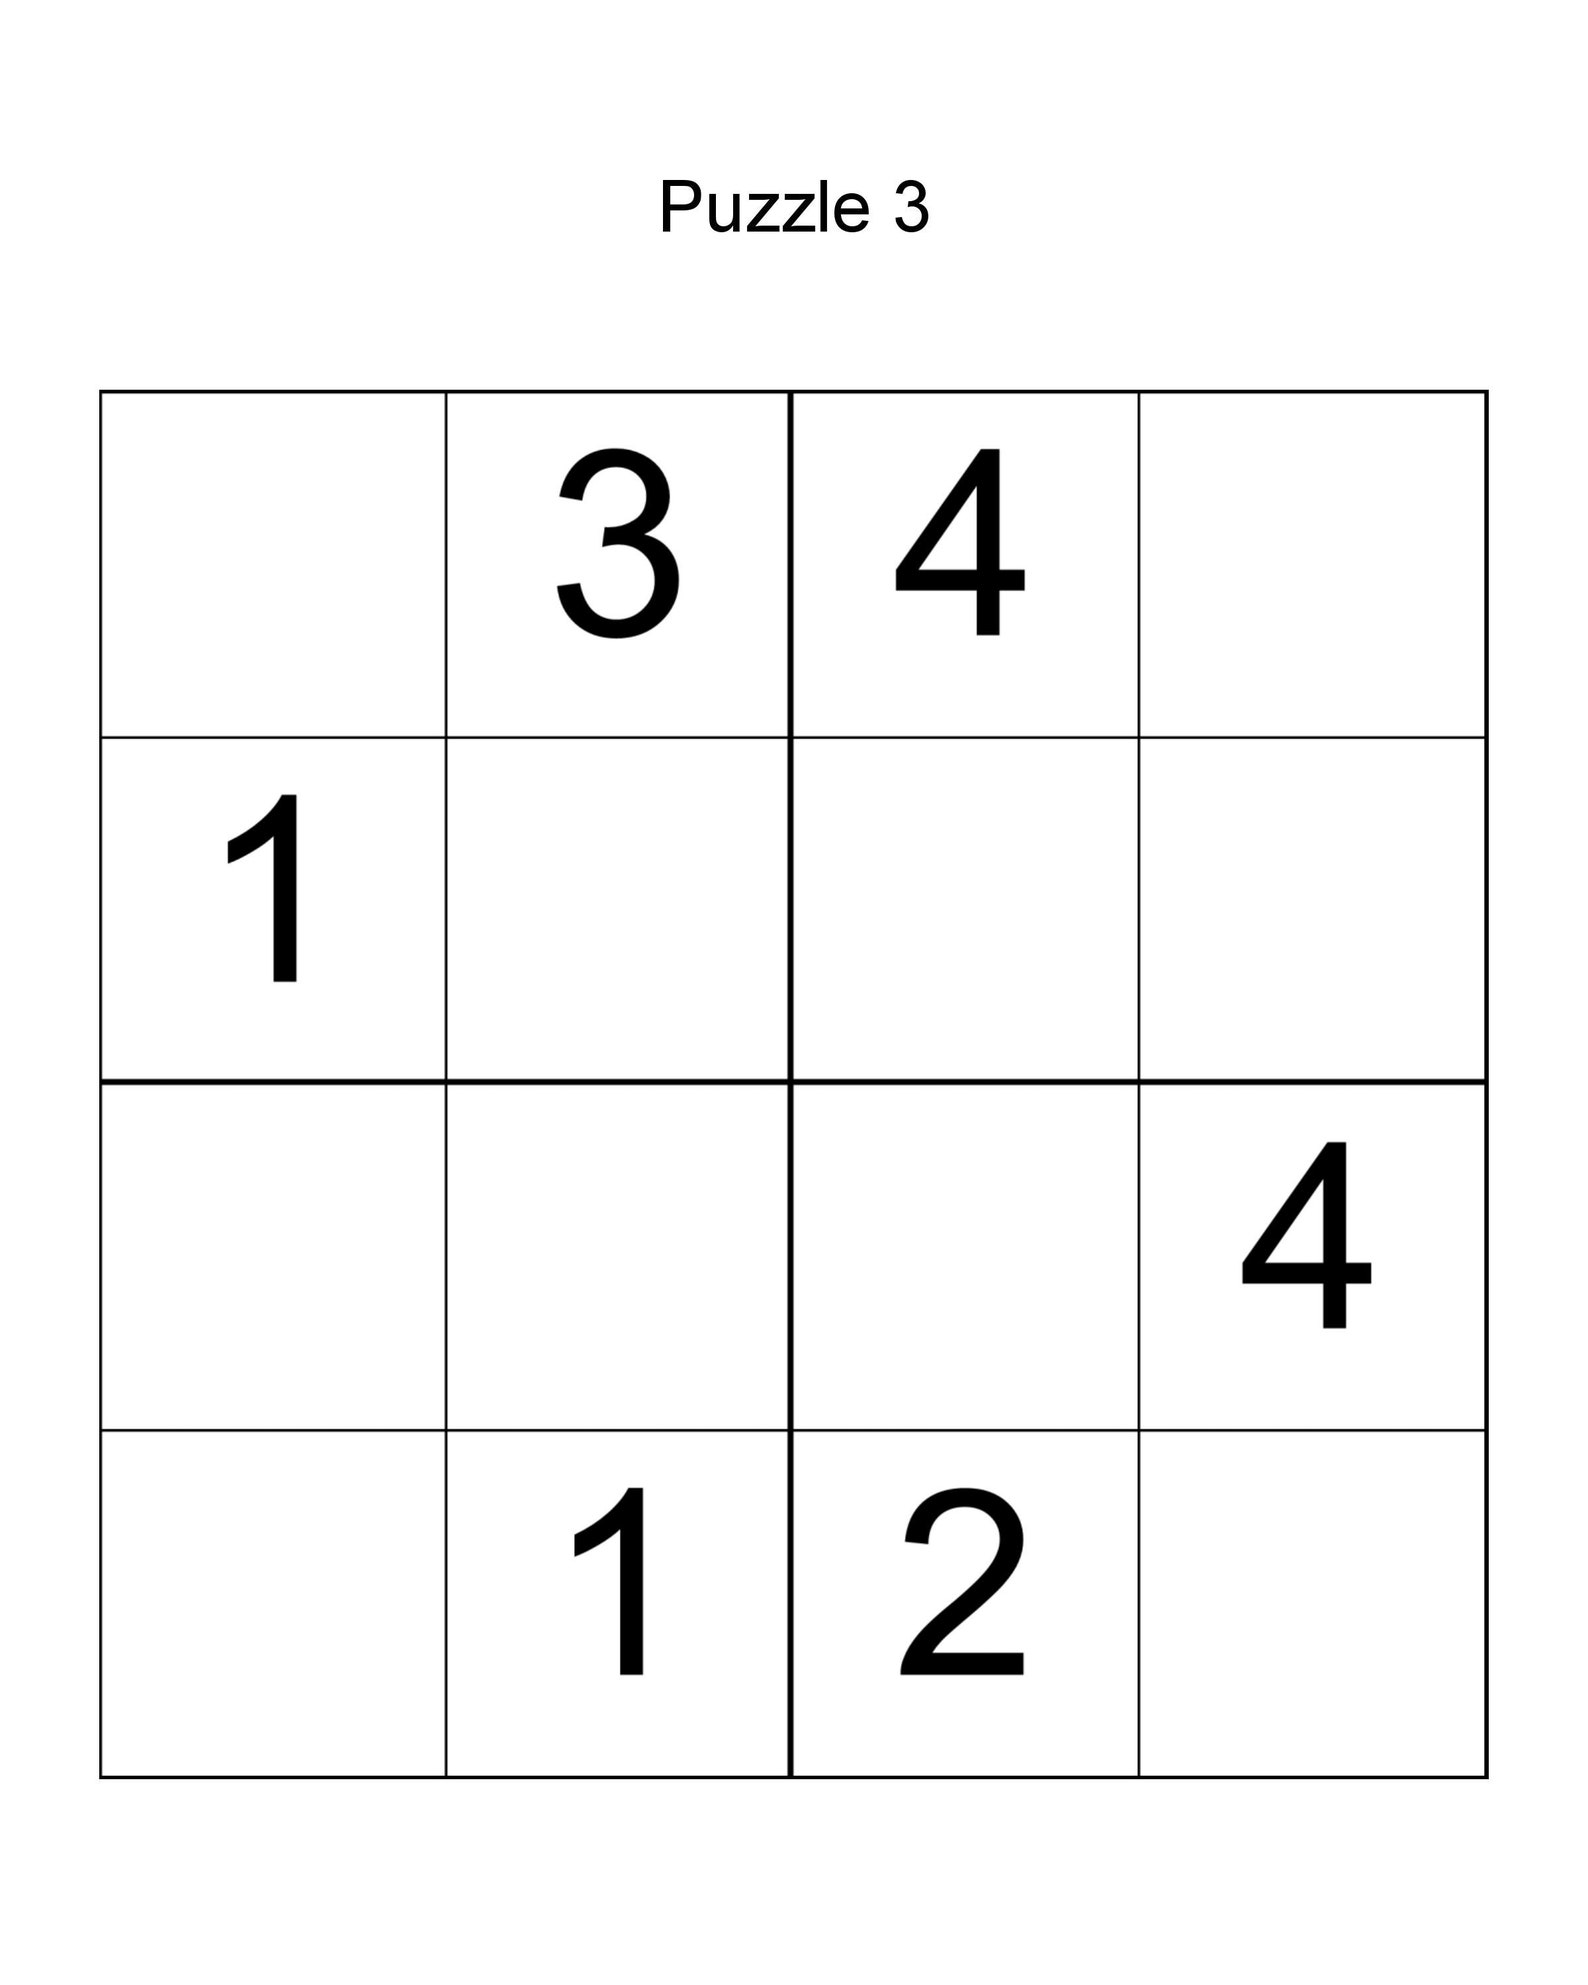 sudoku-for-kids-or-beginners-easy-4x4-sudoku-100-puzzles-etsy